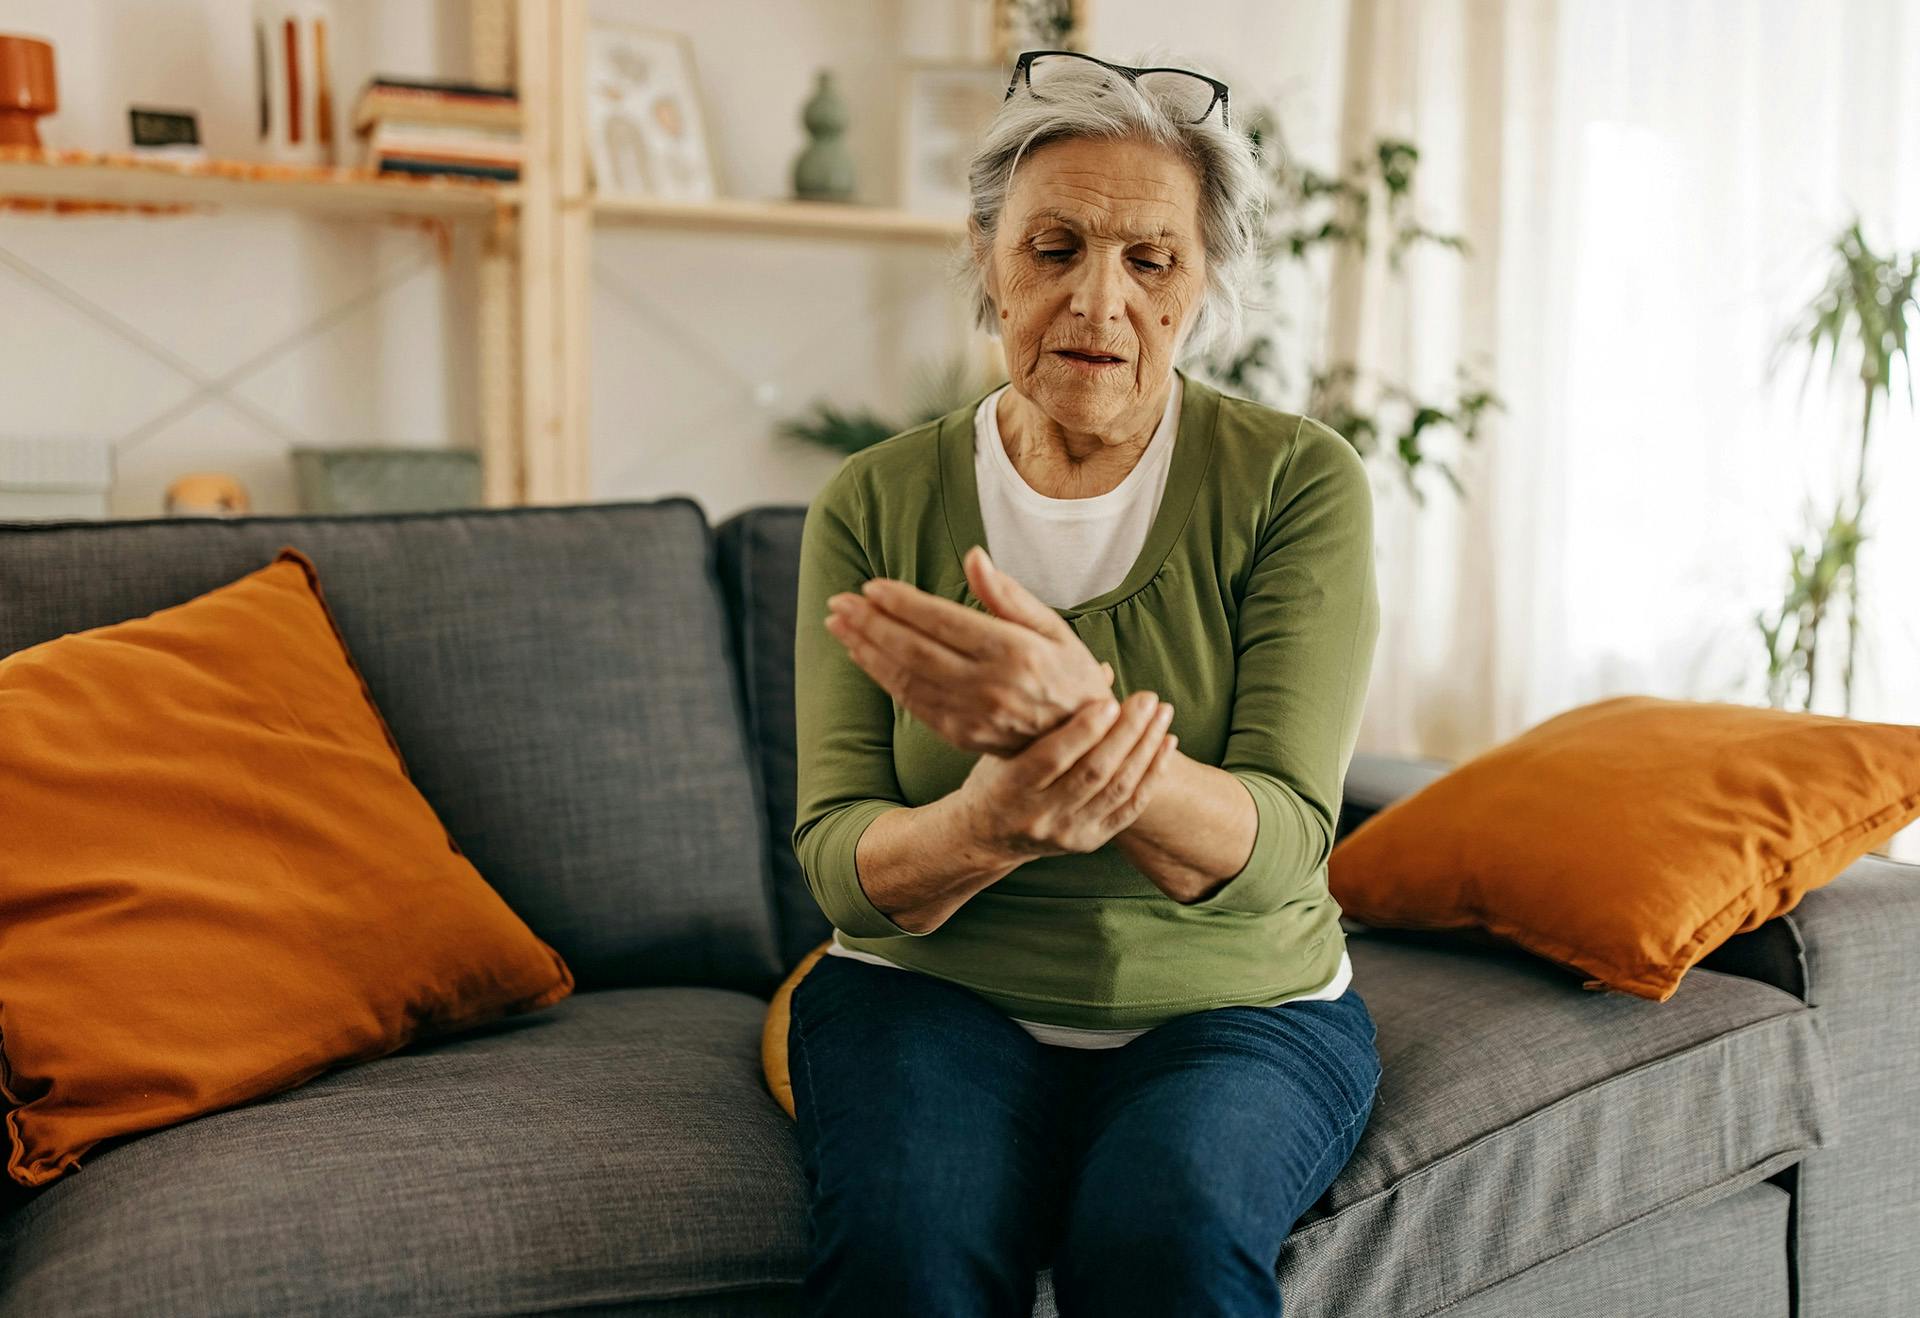 Elderly woman sitting on her couch holding her hand.